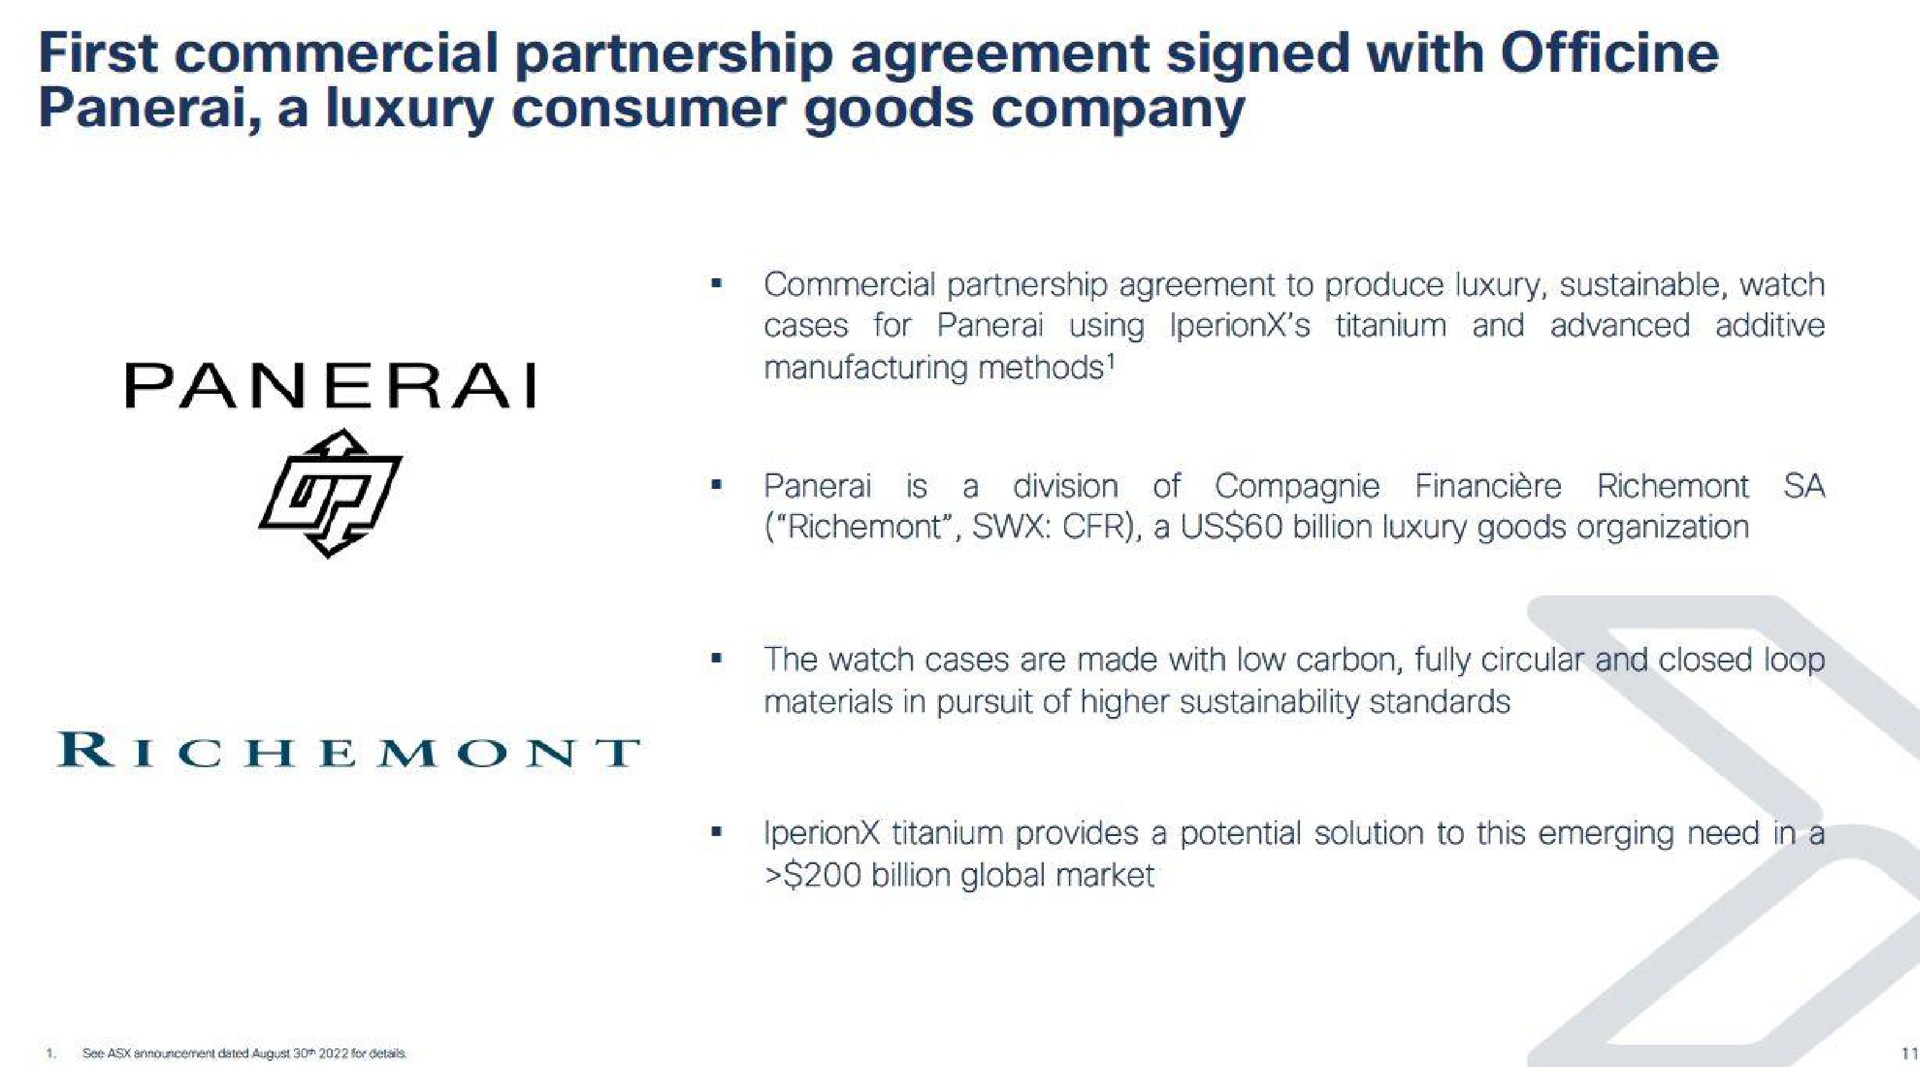 first commercial partnership agreement signed with a luxury consumer goods company | IperionX